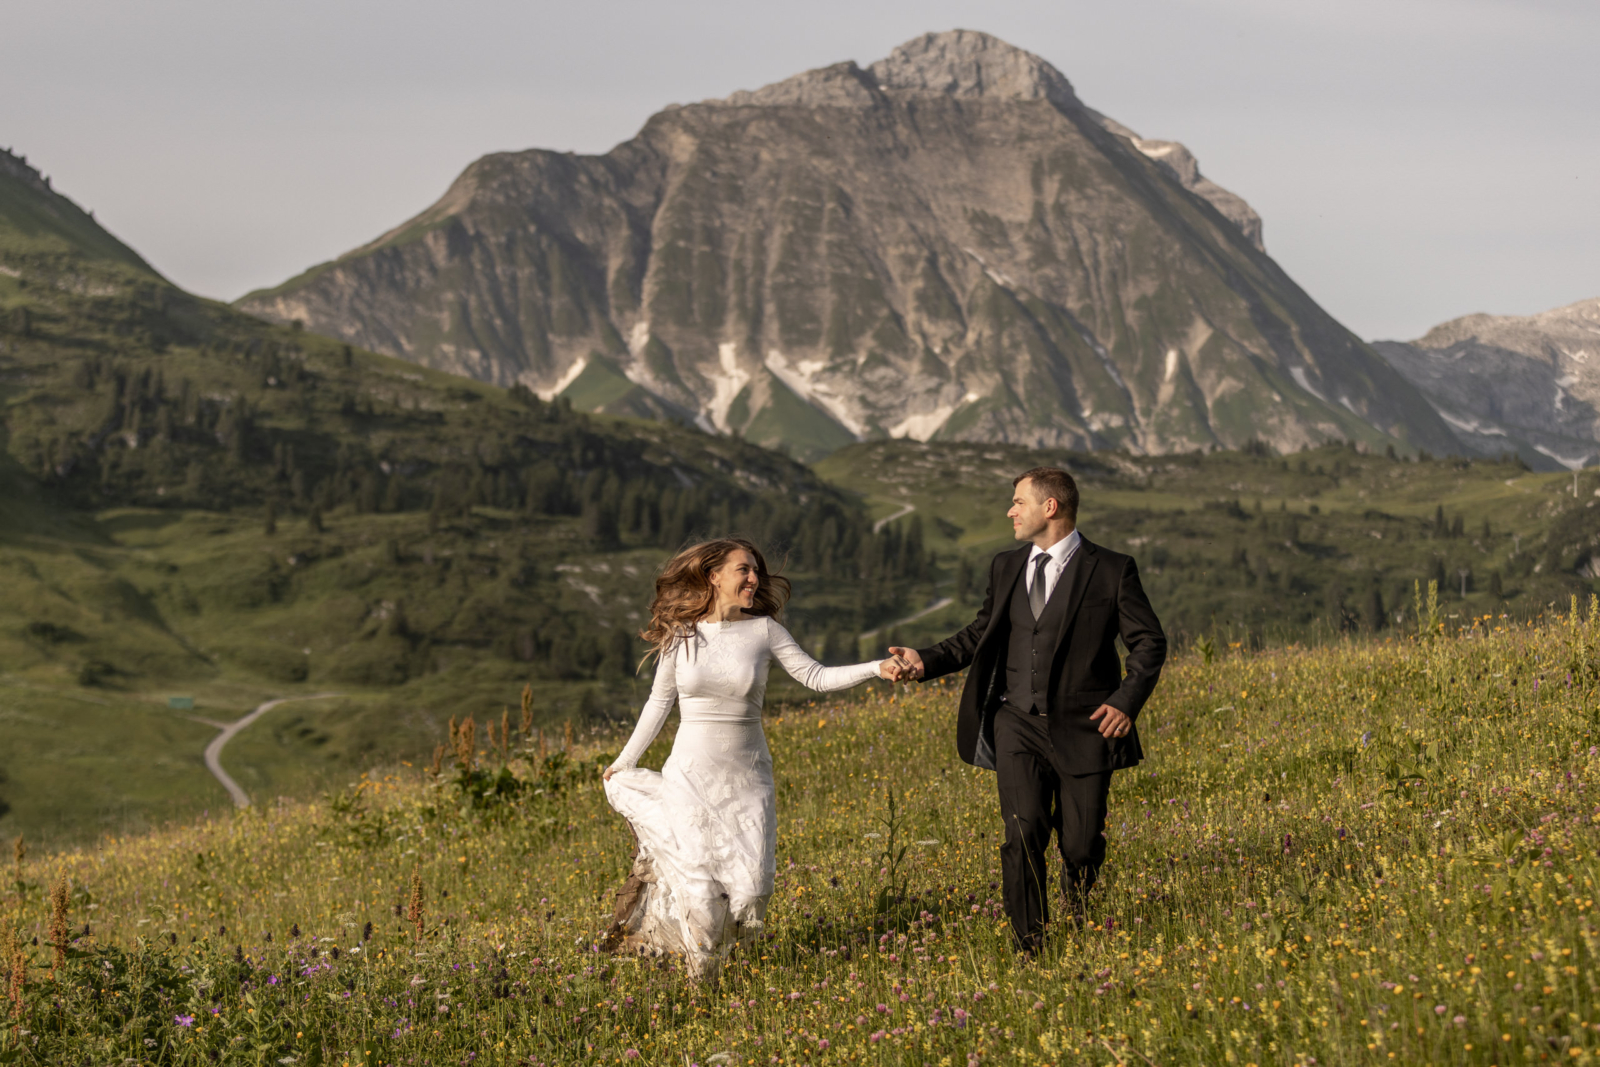 Elopement Photos Amidst the Blooming Wildflowers in Austria